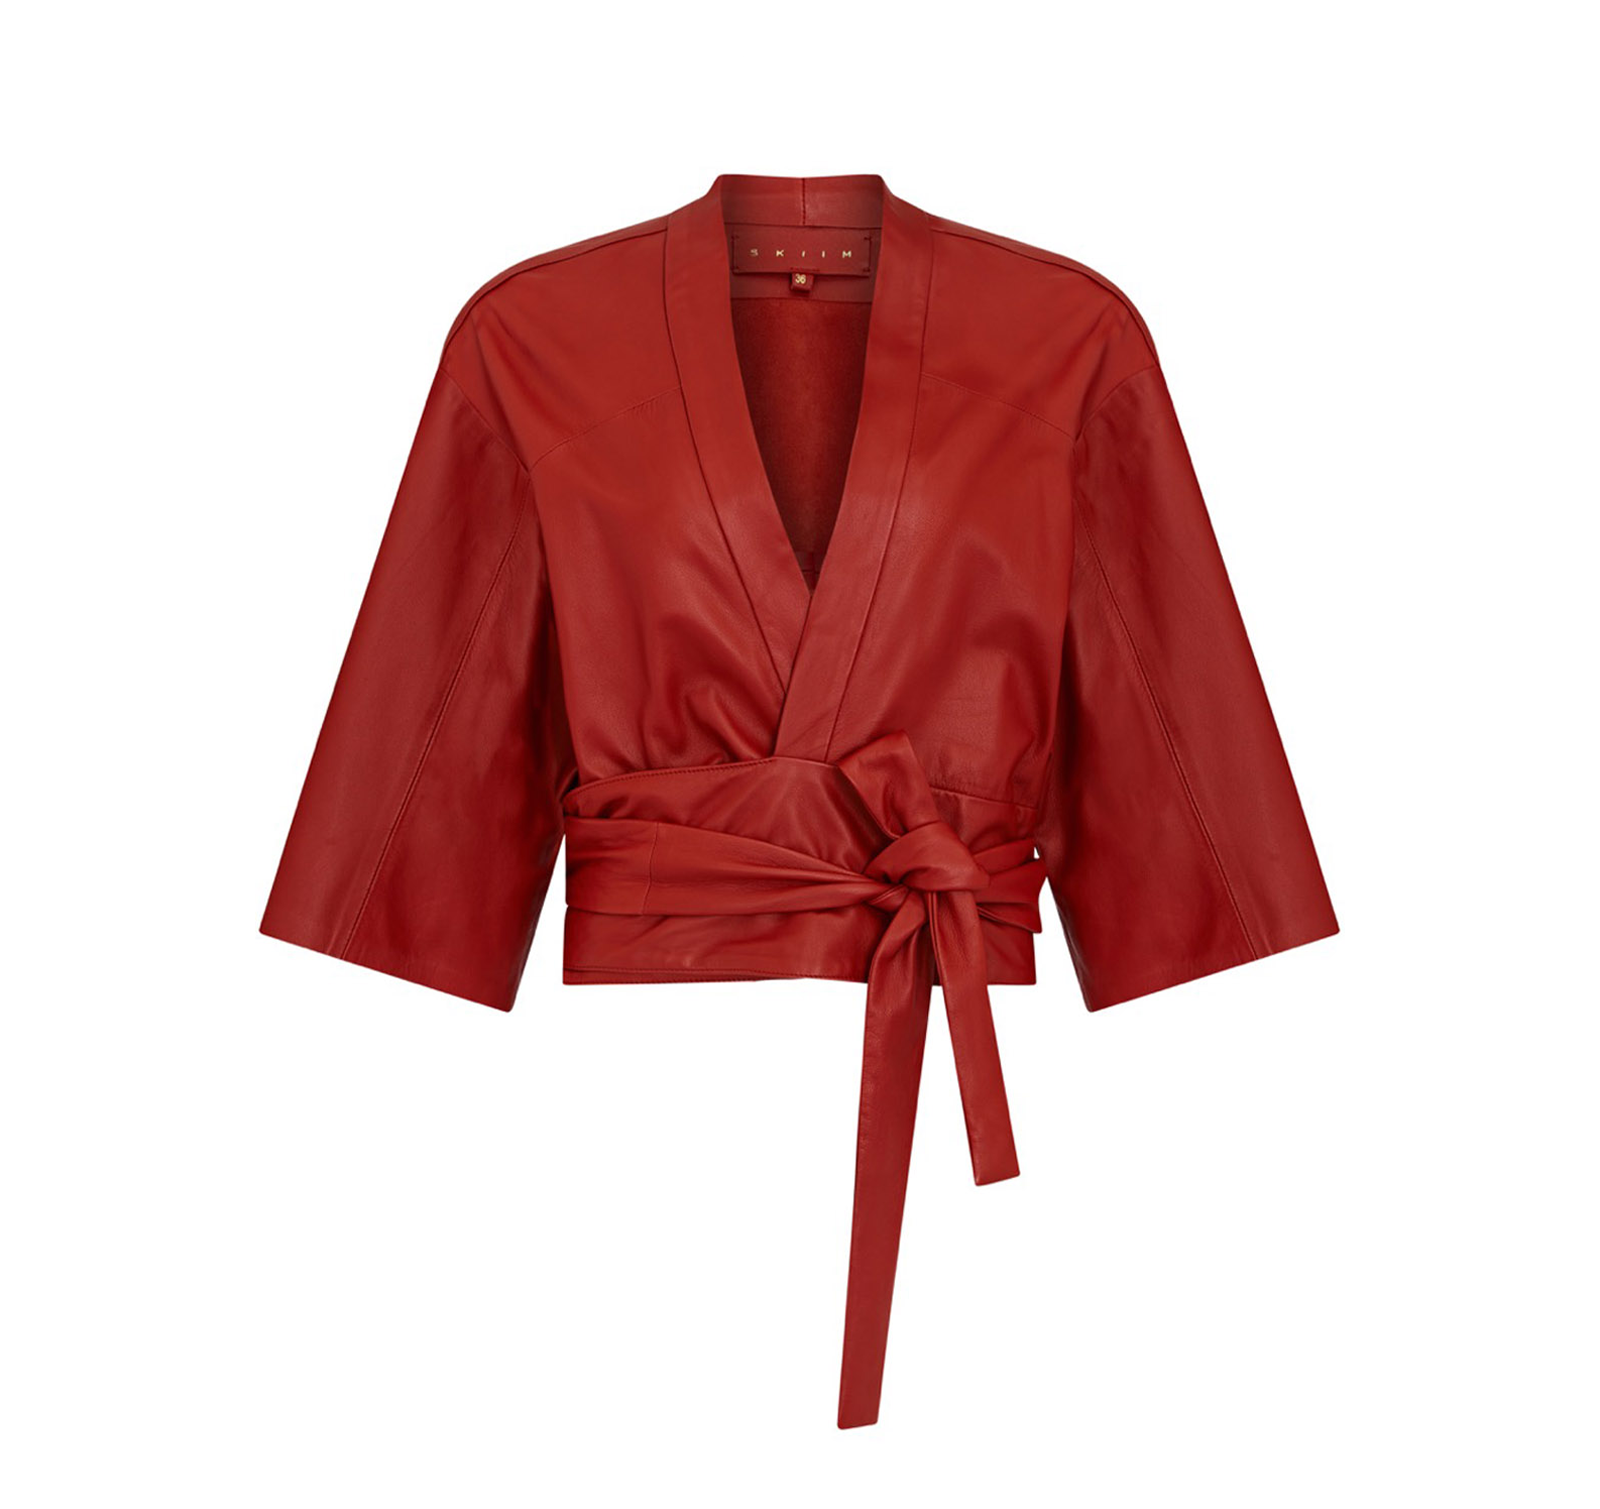 Tilly LEATHER KIMONO TOP - RED